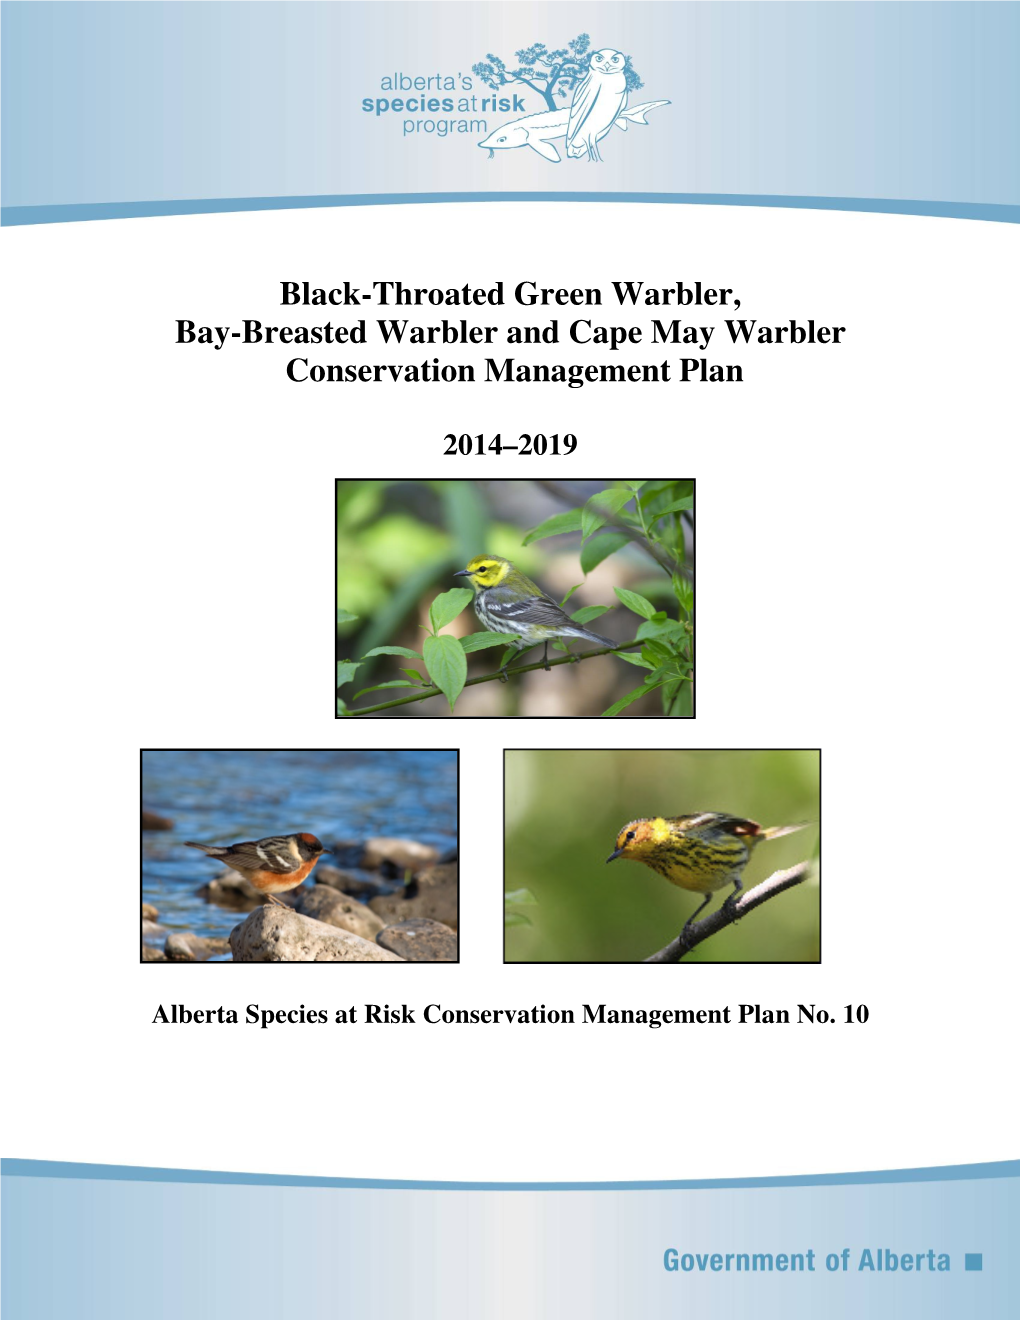 Black-Throated Green Warbler, Bay-Breasted Warbler and Cape May Warbler Conservation Management Plan